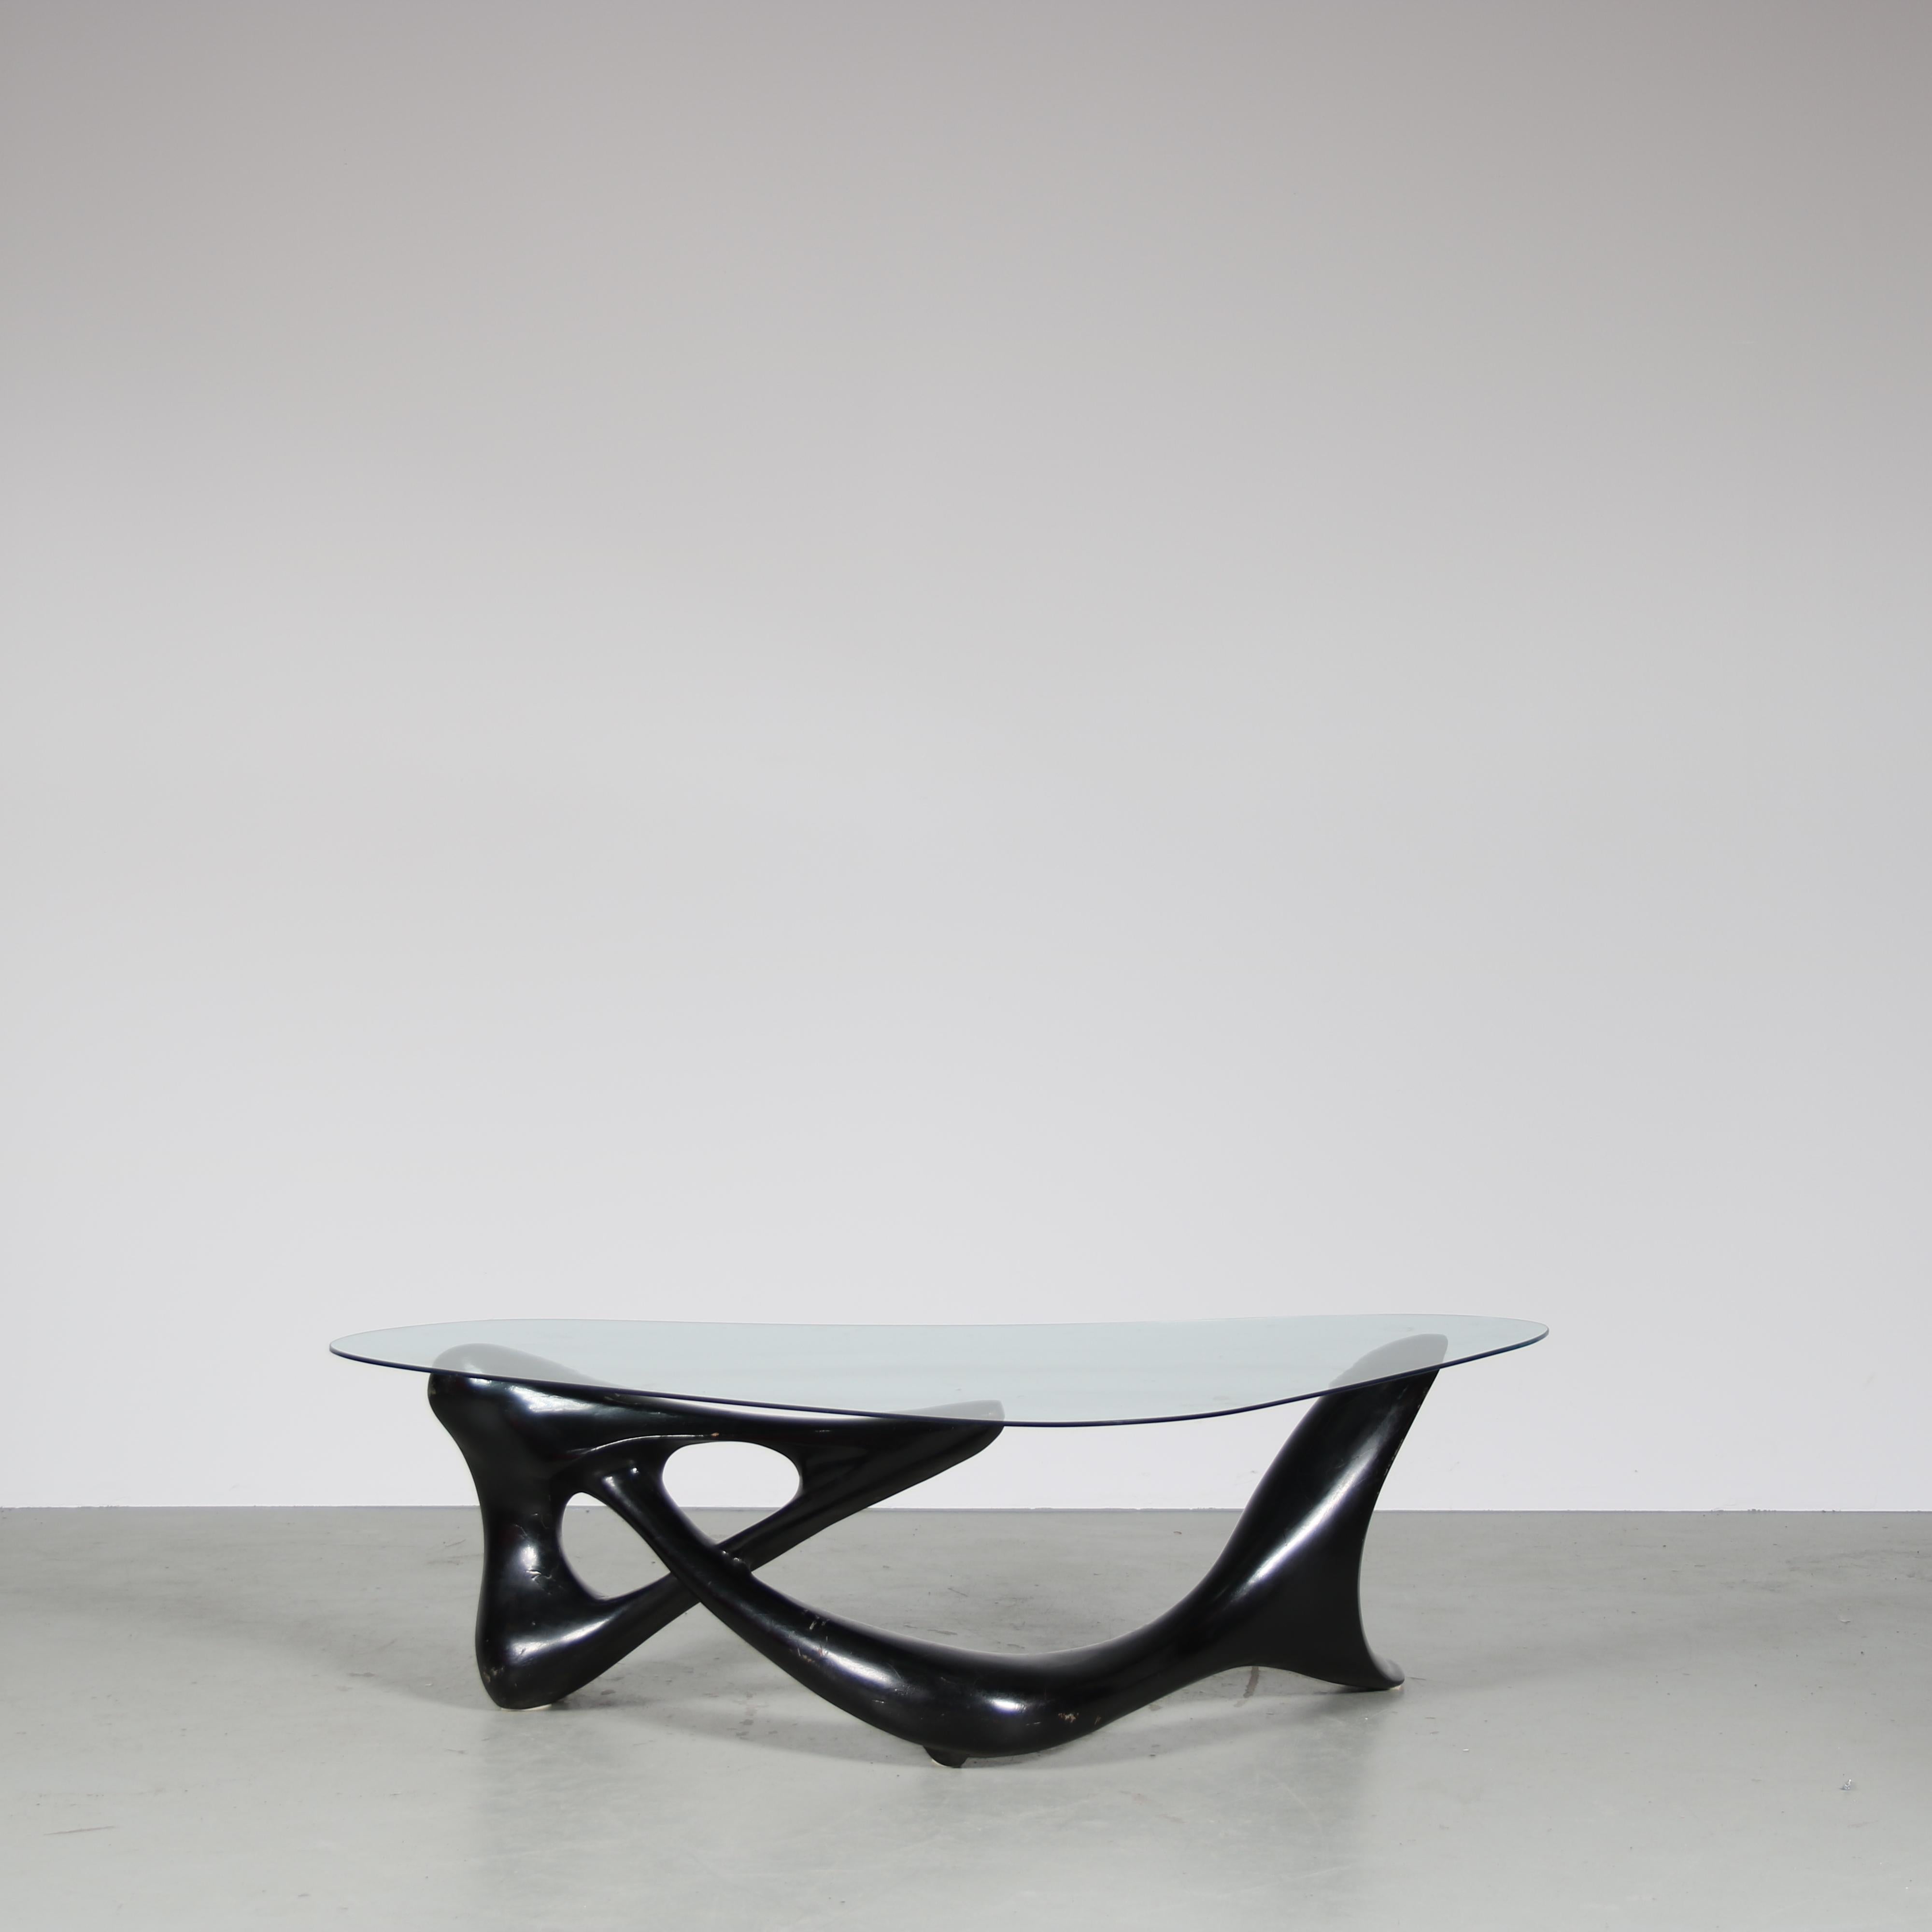 A striking coffee table from Italy, manufactured in the 1950s.

Its organic-shaped black wooden base with elegant curves and angles contrasts beautifully with the freeform glass top, creating a unique and eye-catching piece. The table’s minimalist